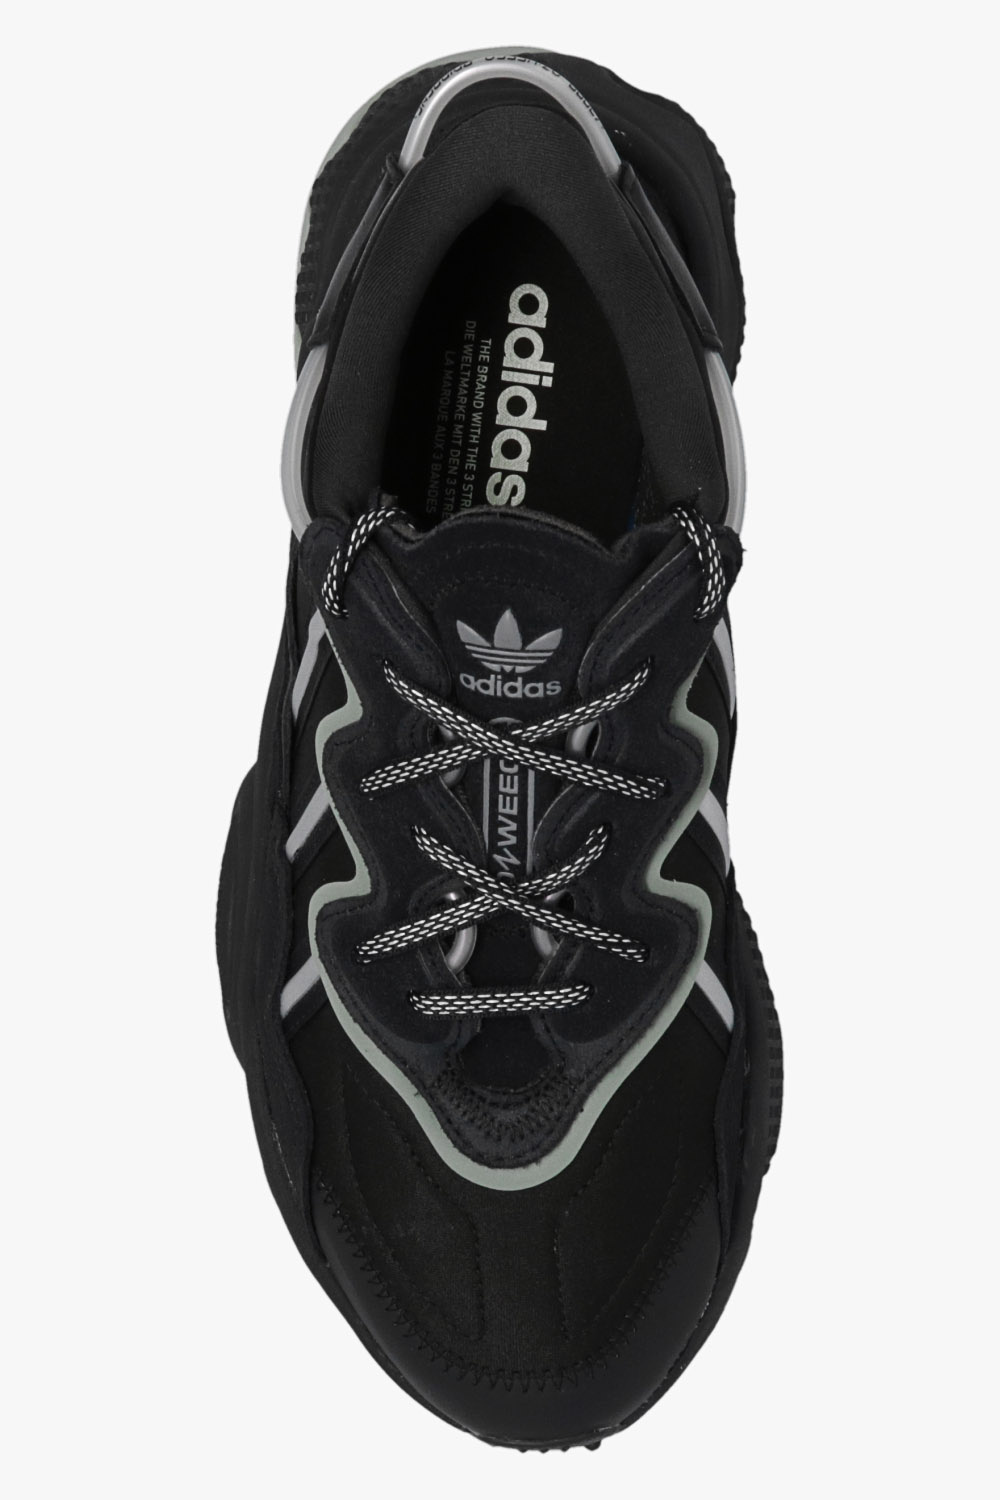 adidas cloudfoam ortholite sandals clearance - 'Ozweego' sneakers Originals - De-iceShops Denmark